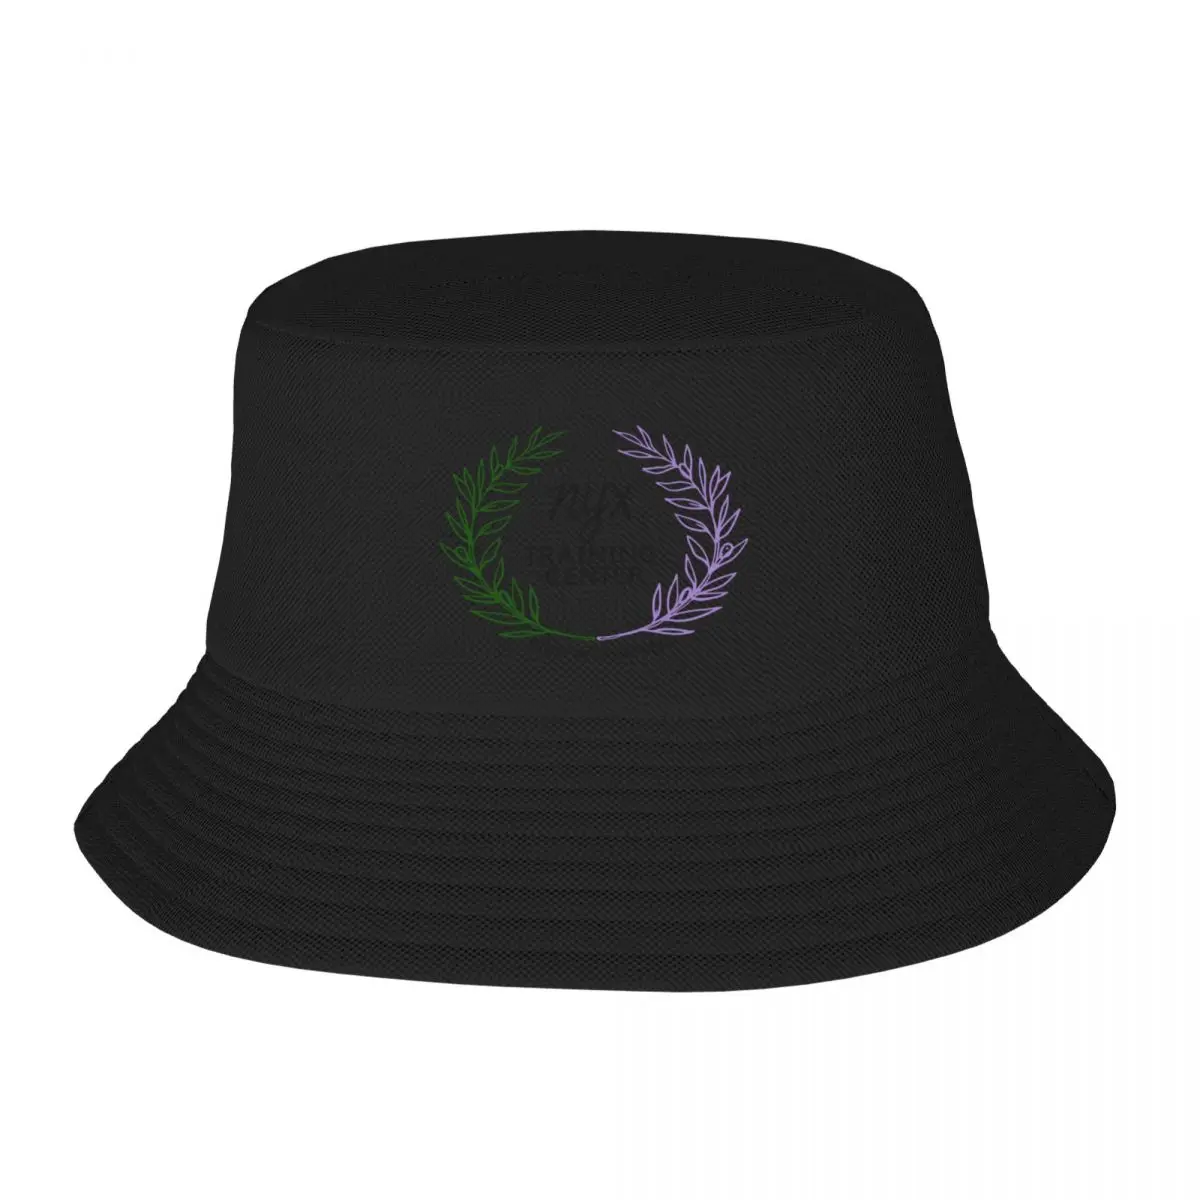 

New Nyx Training centerfull color logo Bucket Hat Hat Man For The Sun Military Tactical Caps Vintage Women's Golf Clothing Men's